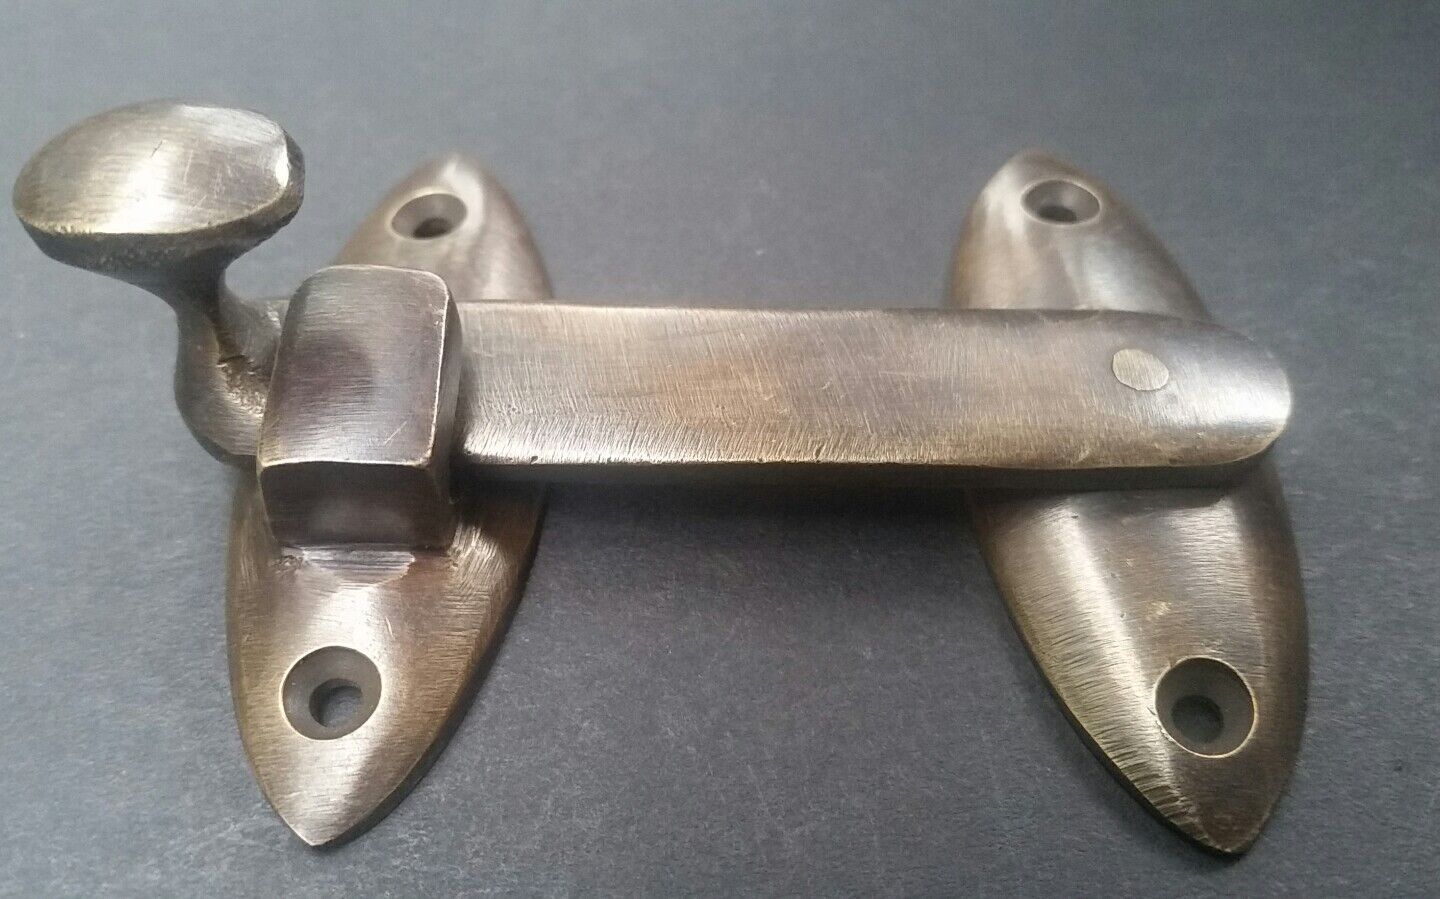 4 x solid brass toggle latch 3-1/4”w x 2-1/4" tall overall size #X22